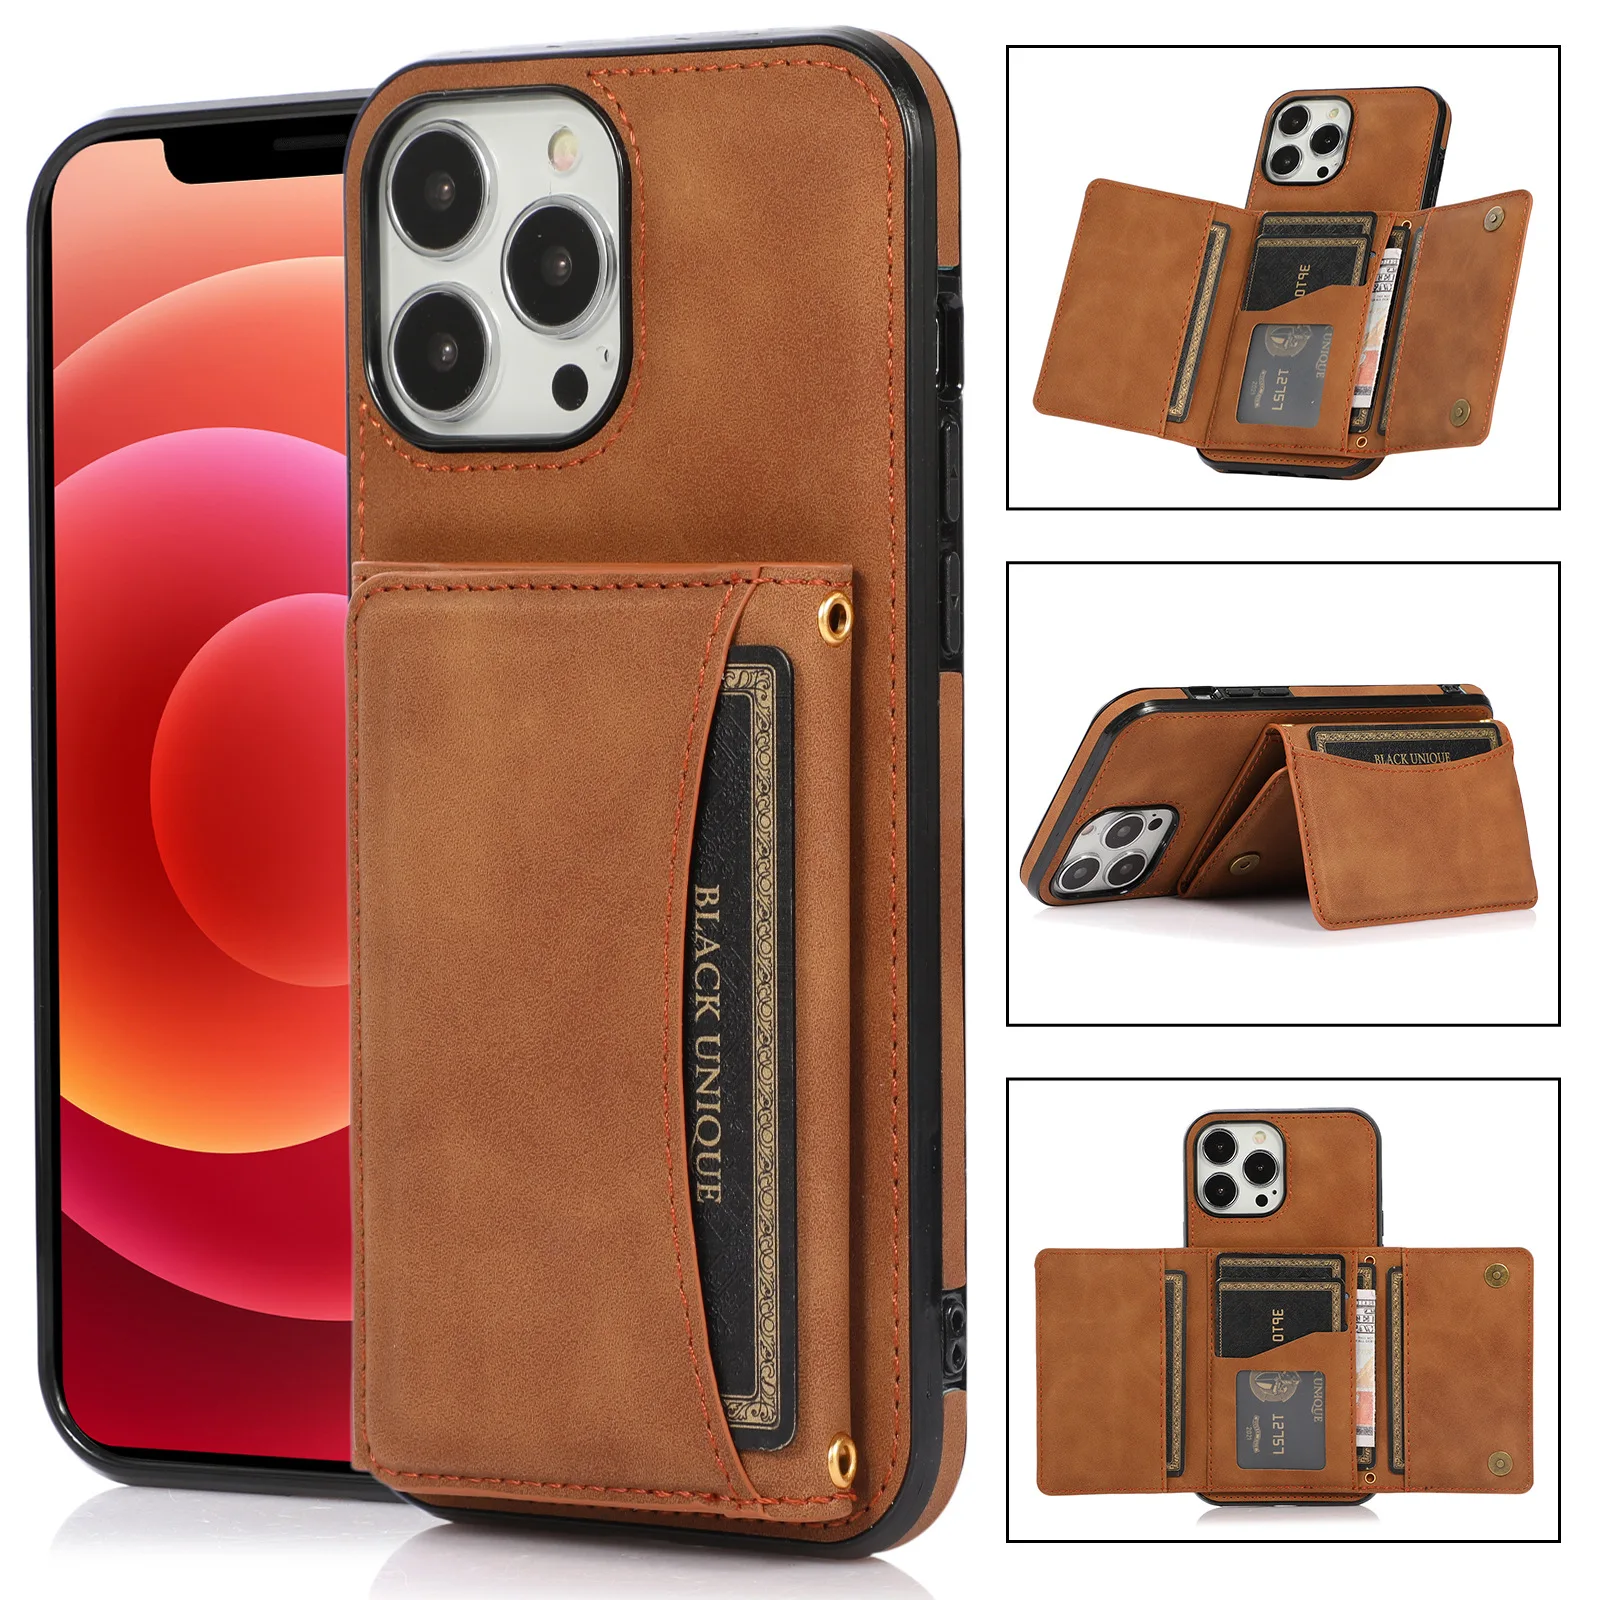 Funermei for iPhone 14 Pro Max Case Wallet for Women Leather Folio Designer  Luxury Phone Cases with Credit Card Holder Stand Flip Cute Orange Cover